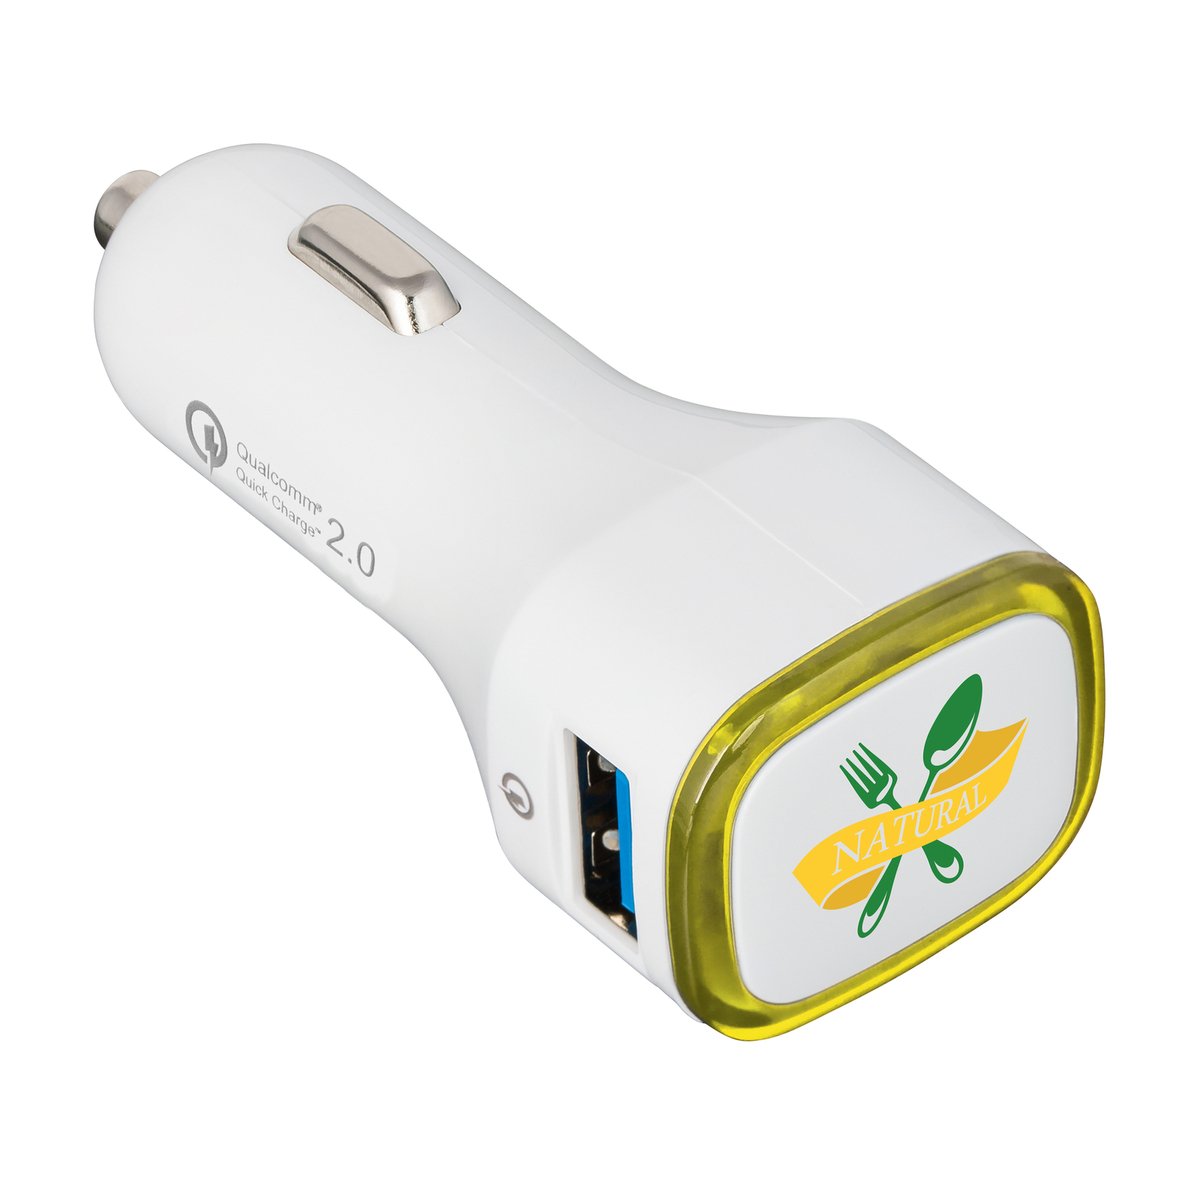 Chargeur voiture USB Quick Charge 2.0® COLLECTION 500 jaune